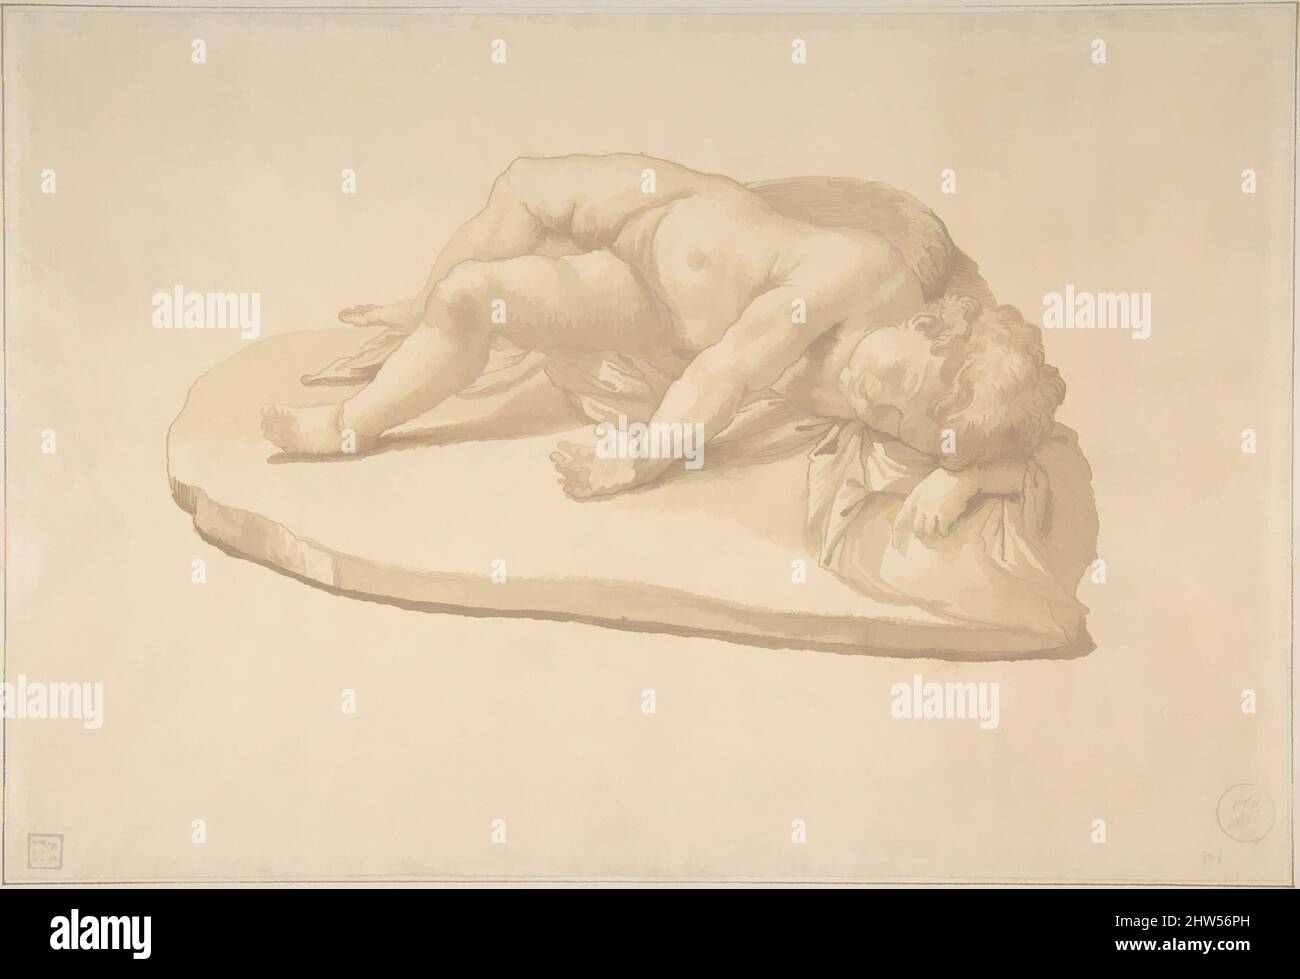 Art inspired by Copy after a Sculpture of the Sleeping Eros Based on an Antique Model (from Cassiano dal Pozzo's 'Paper Museum'), ca. 1630, Pen and brown ink, brush and brown wash, 8 9/16 x 12 5/8in. (21.7 x 32.1cm), Drawings, Giovanni Angelo Canini (Italian, Rome 1615–1666 Rome), The, Classic works modernized by Artotop with a splash of modernity. Shapes, color and value, eye-catching visual impact on art. Emotions through freedom of artworks in a contemporary way. A timeless message pursuing a wildly creative new direction. Artists turning to the digital medium and creating the Artotop NFT Stock Photo